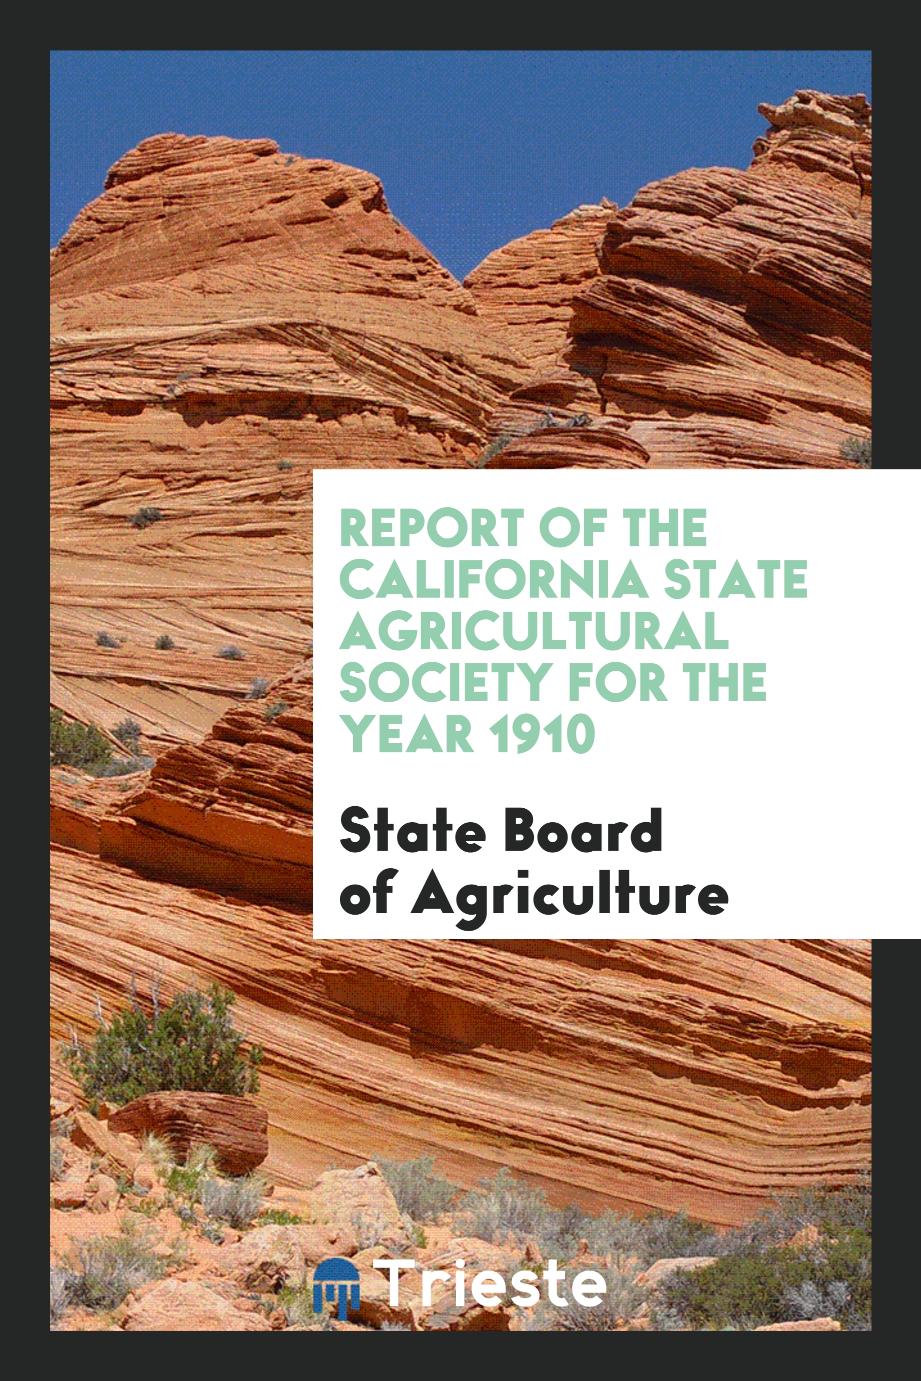 Report of the California State Agricultural Society for the Year 1910